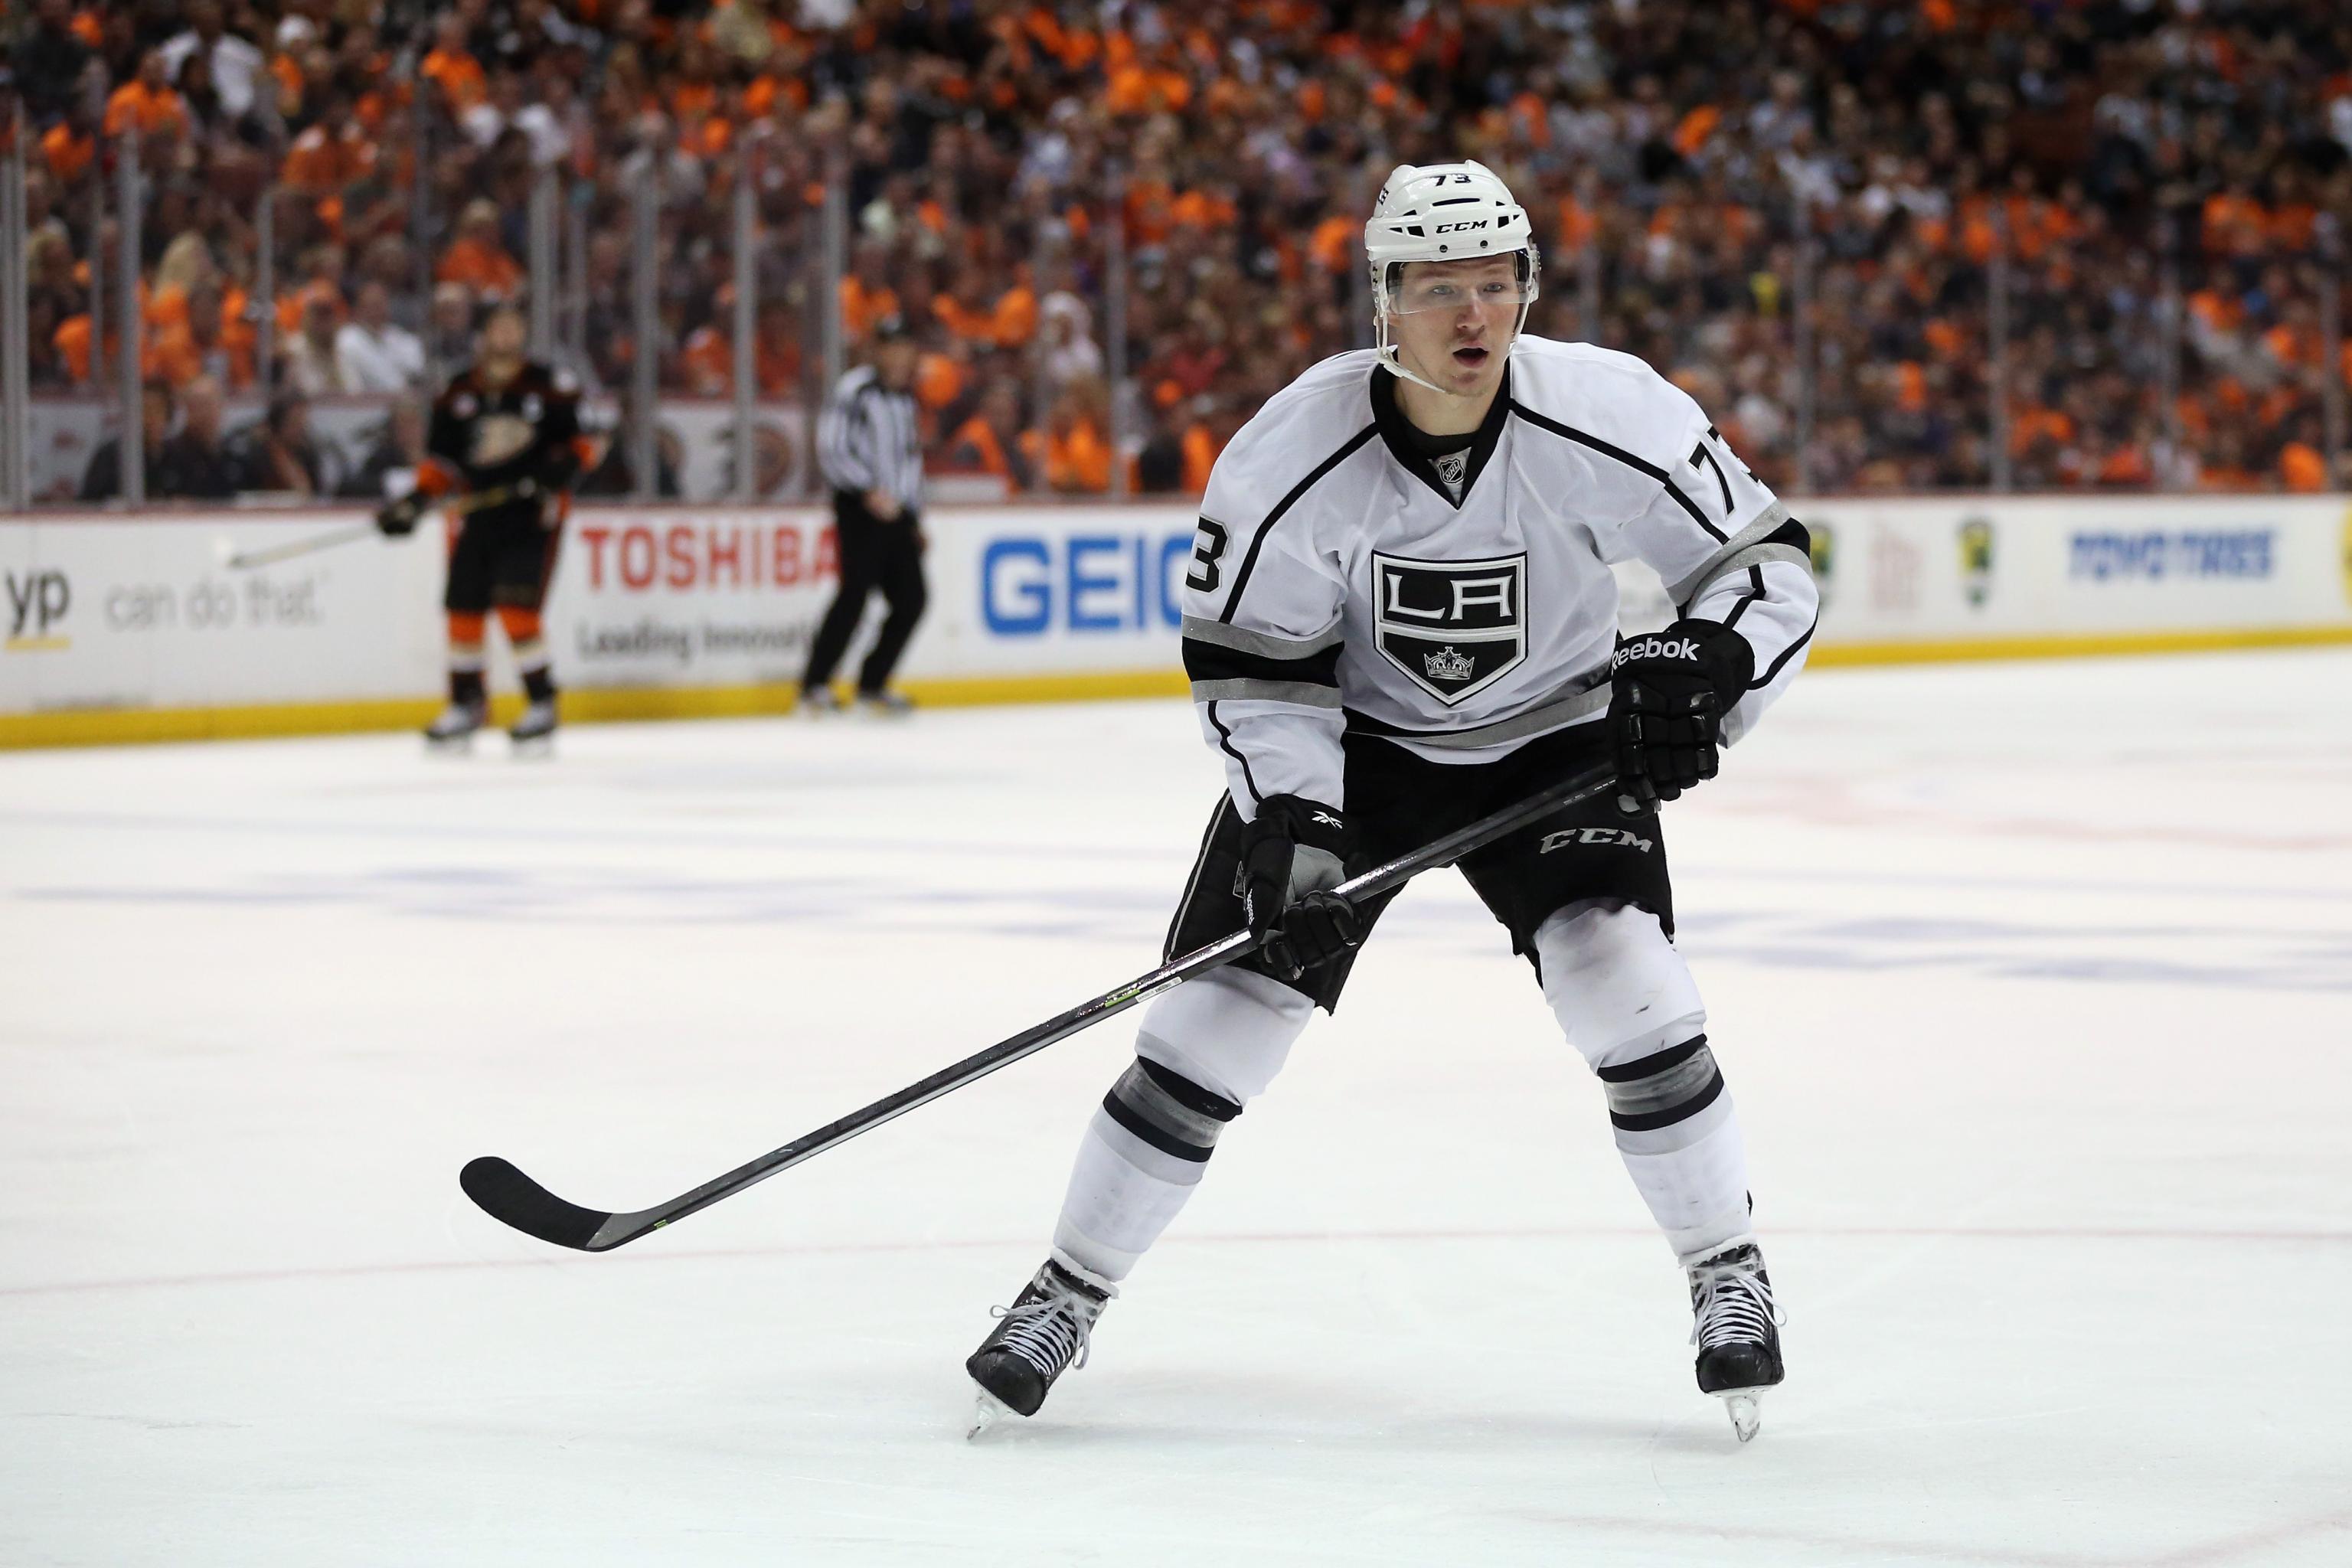 Tyler Toffoli Cementing Himself as one of the Flames' Best this Season